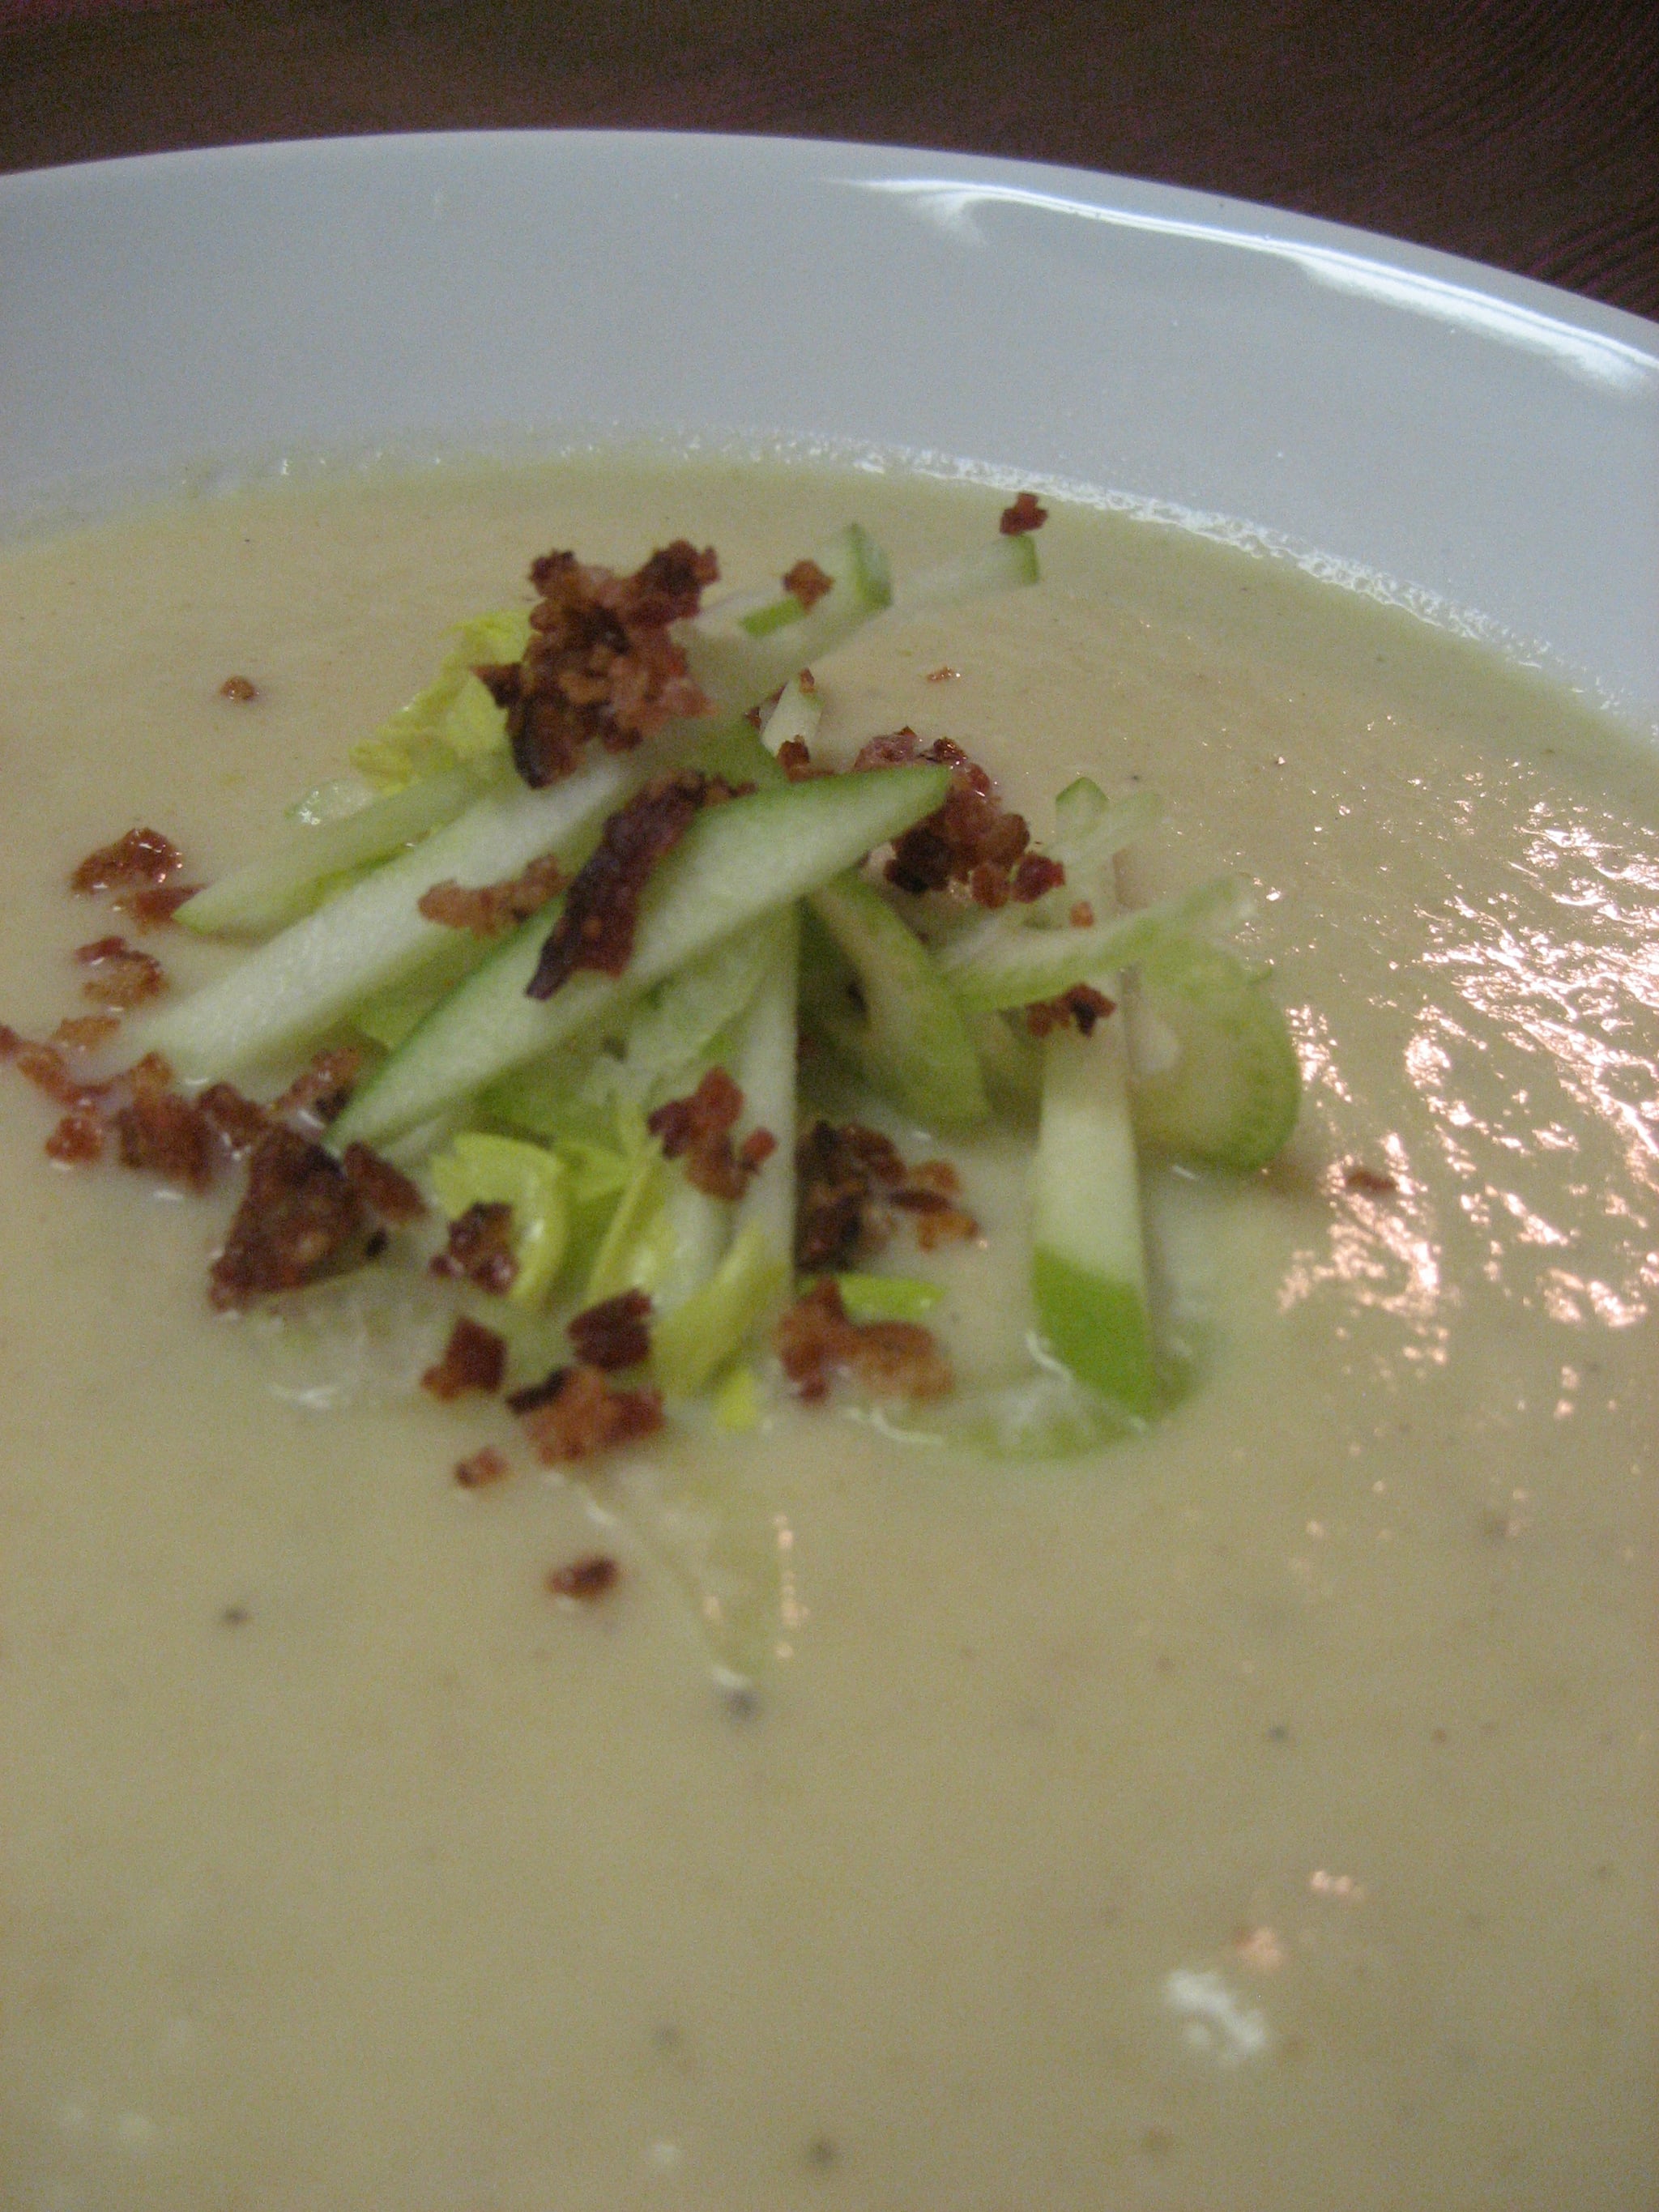 Celery Root Soup With Bacon and Apple